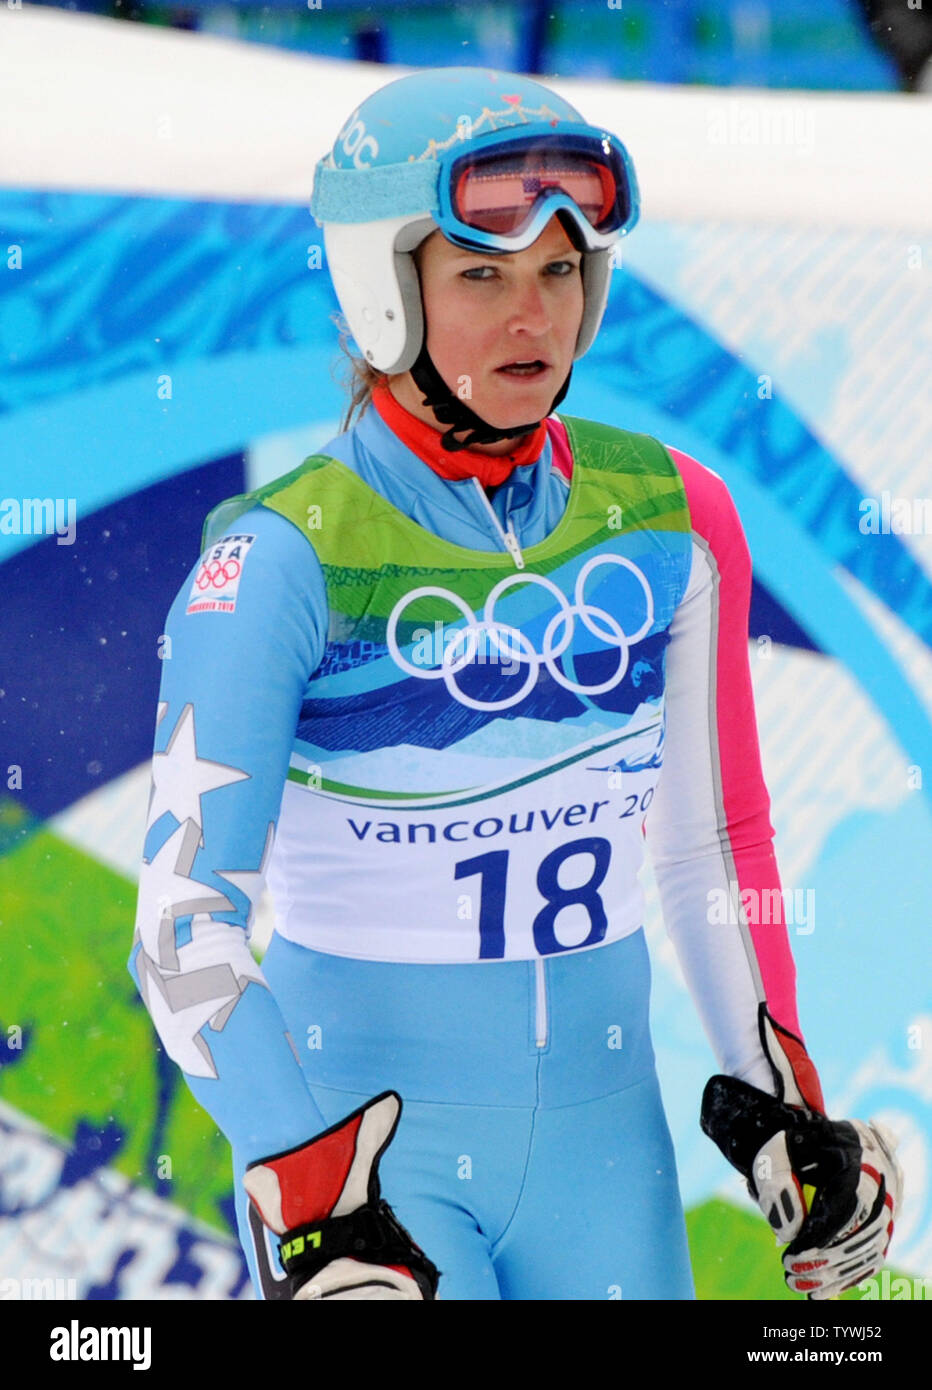 An emotional and dejected USA's Julia Mancuso leaves the course after her slow time in the first run of the Women's Giant Slalom at Whistler Creekside at the Winter Olympics on February 24, 2010.  Mancuso had to restart after teammate Lindsey Vonn fell on the course.       UPI/Pat Benic Stock Photo